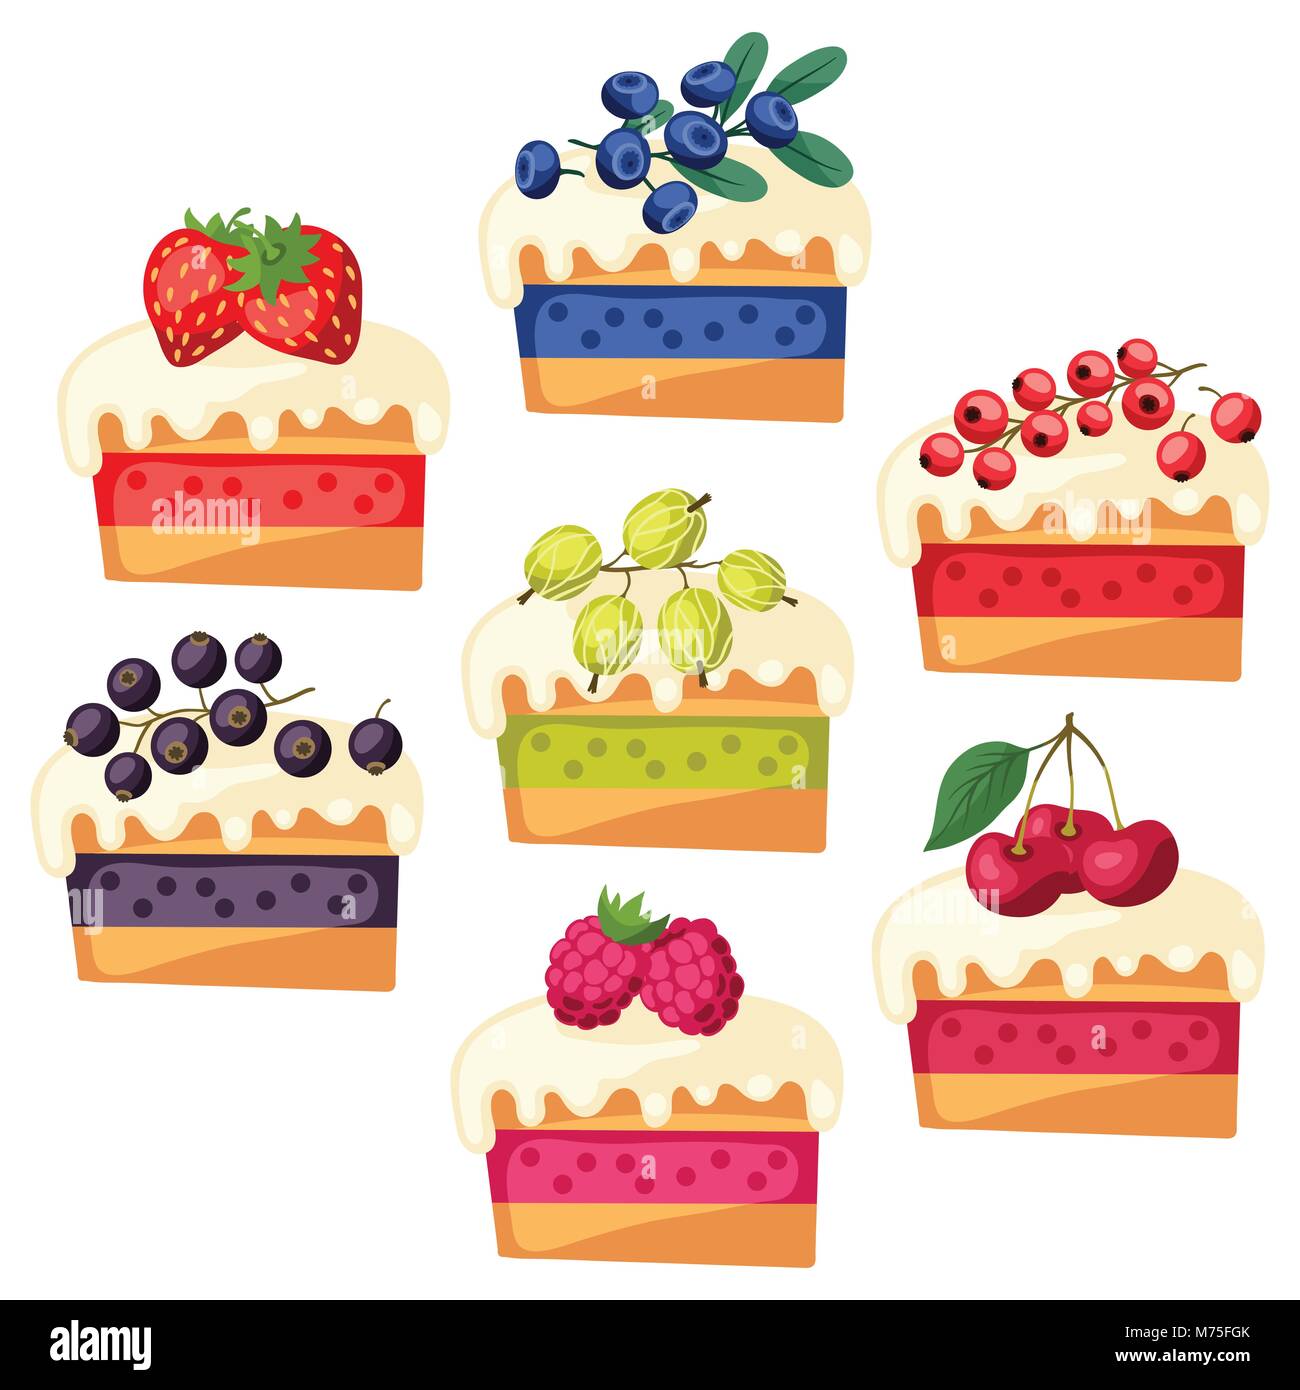 Set of cakes with various filling. Stock Vector